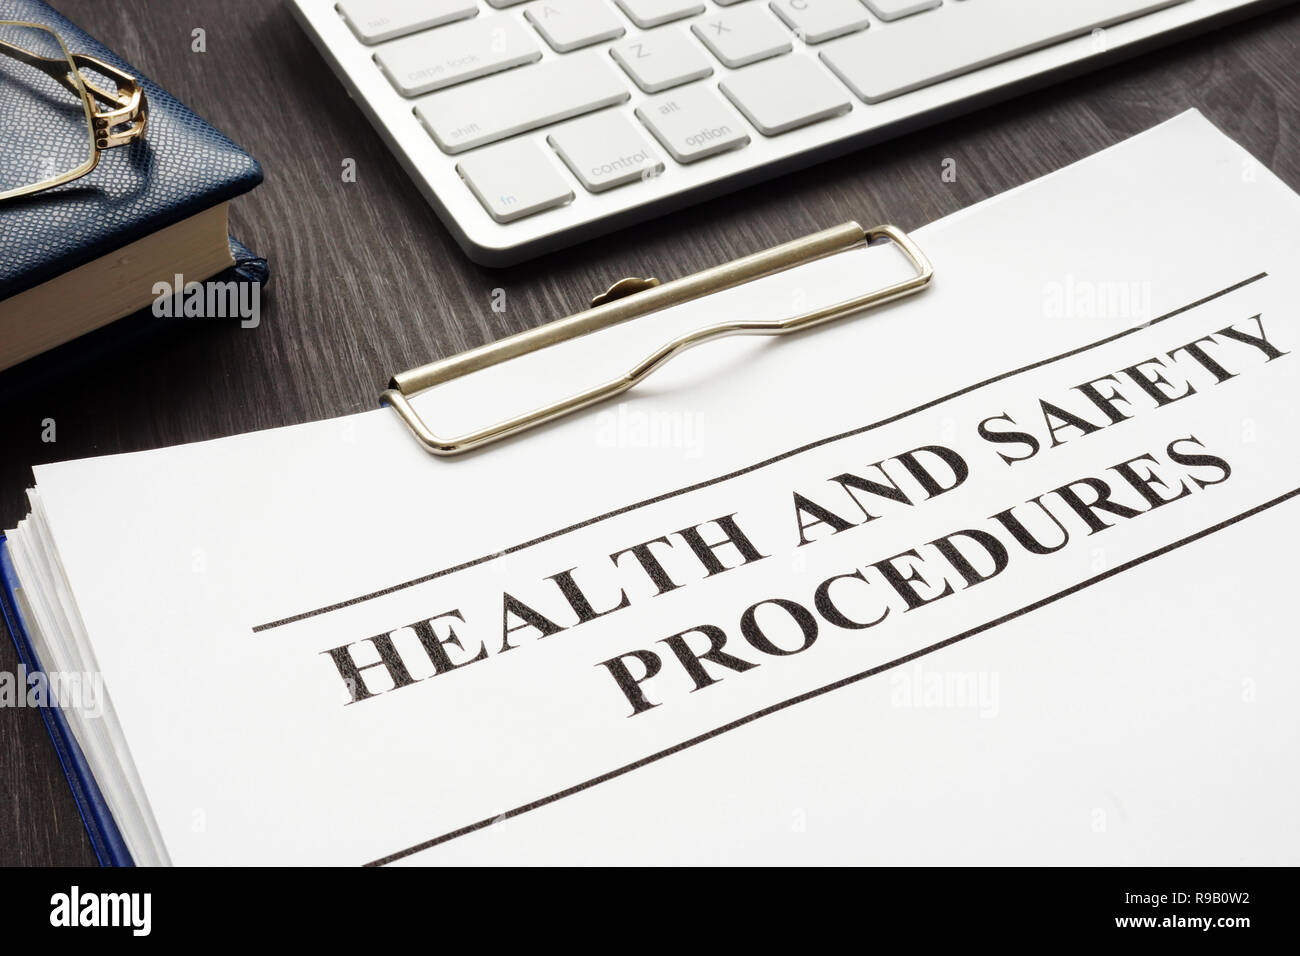 Clipboard with health and safety procedures on the table. Stock Photo